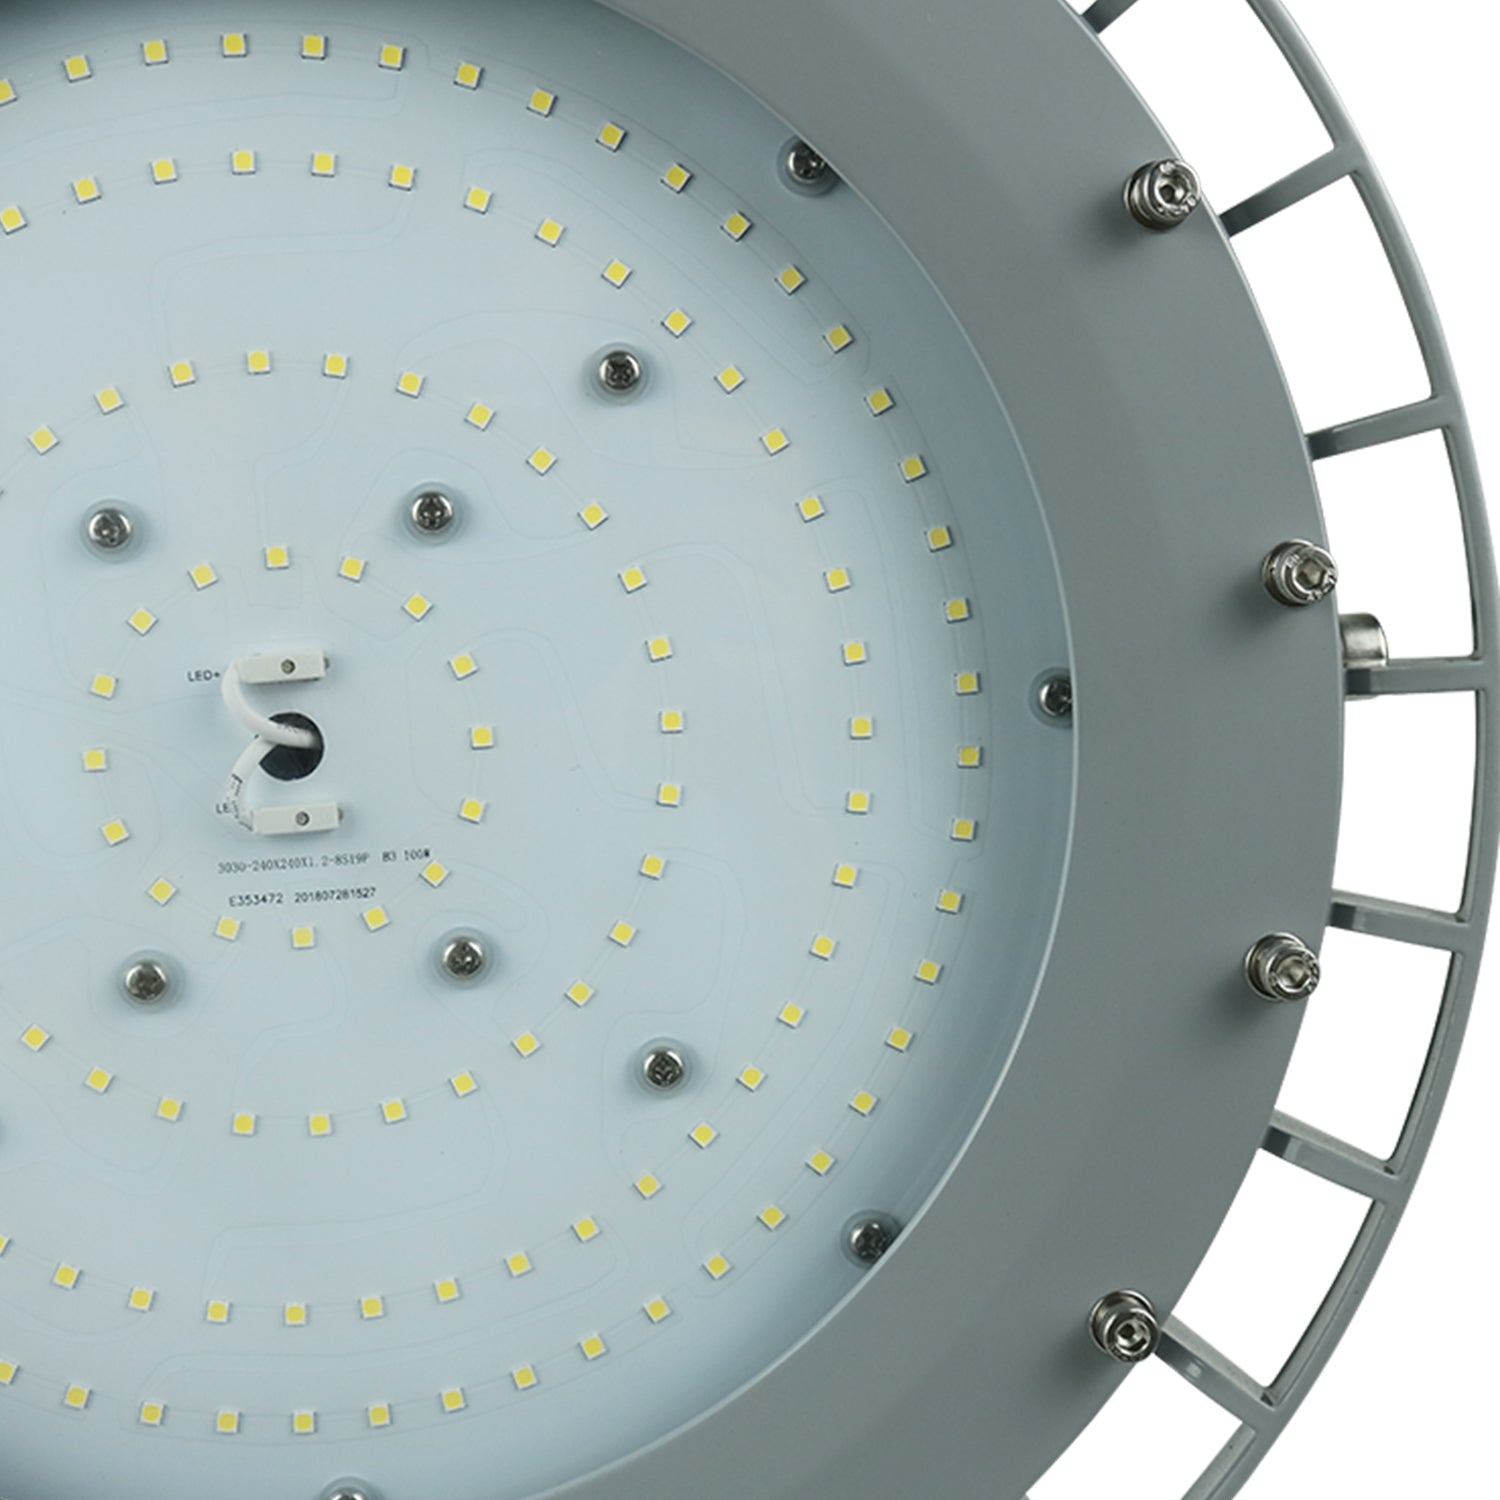 B Series 60W LED Explosion Proof Round High Bay Light - Non Dimmable, 5000K, 8400LM, IP66 Rated for Hazardous Locations